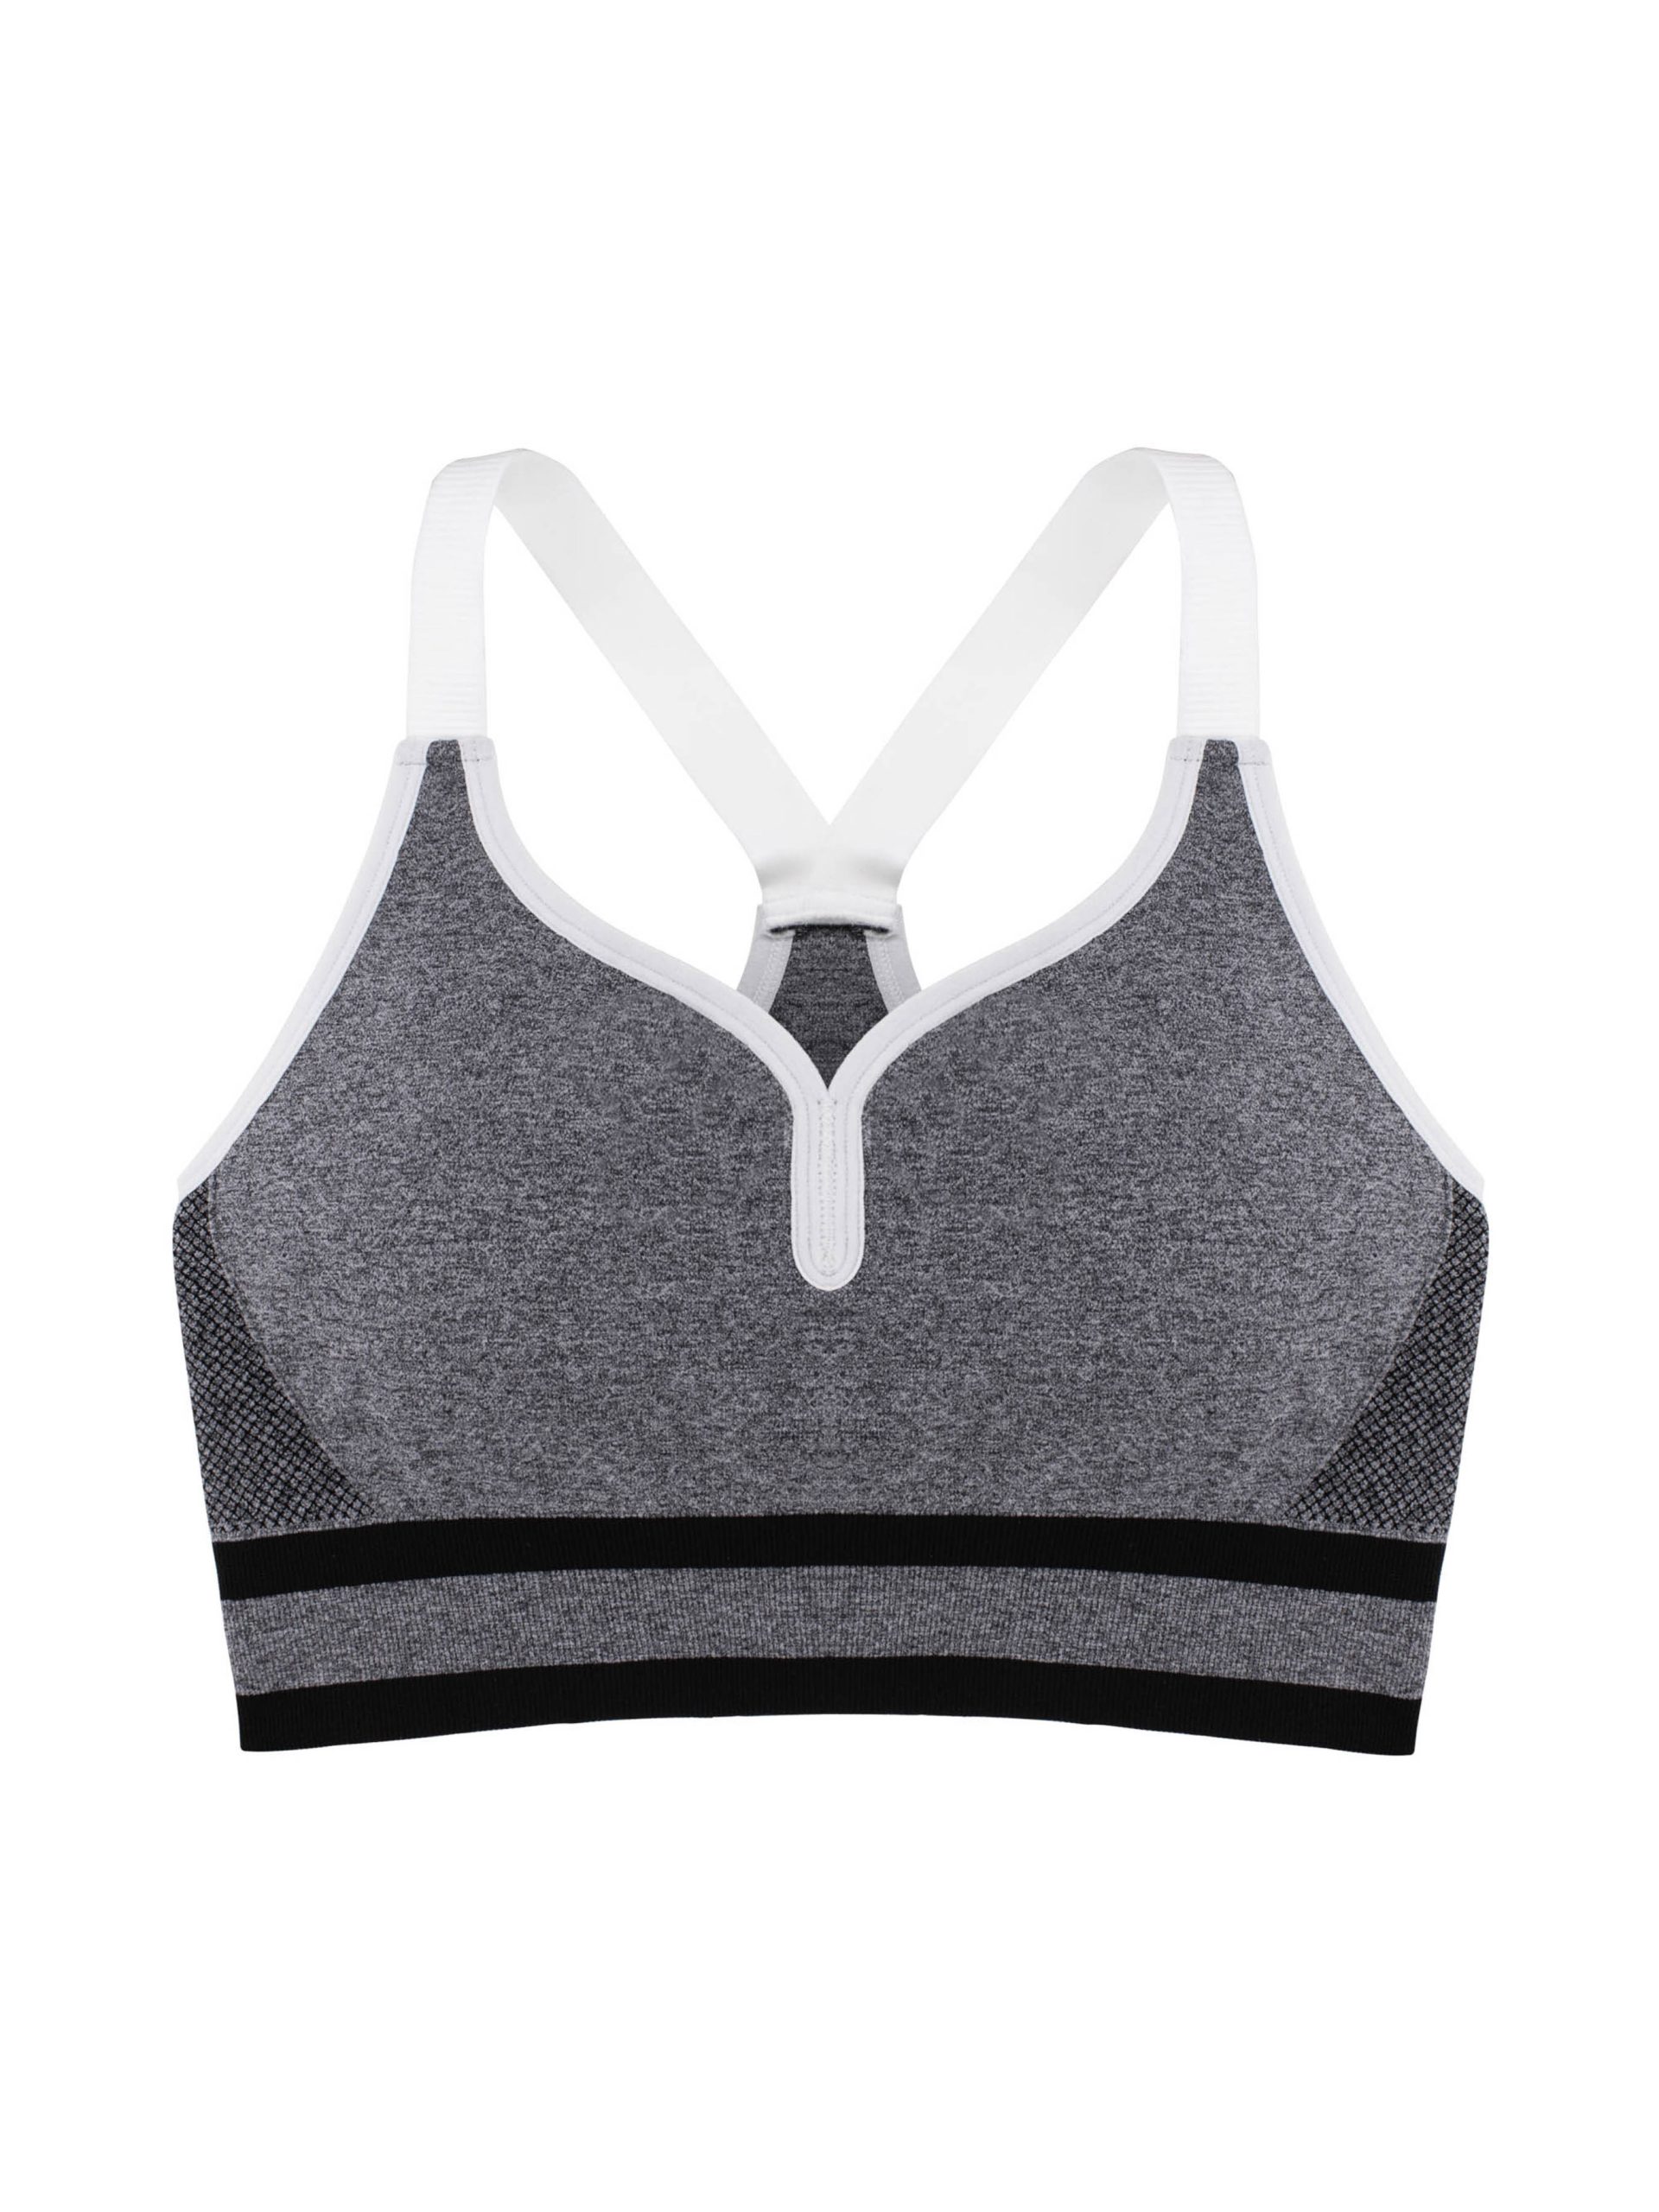 Women's Sports Bra Padded Bra Medium Support Patchwork See Through Solid  Color Black White Mesh Yoga Fitness Running Bra Top Sport Activewear  Breathab